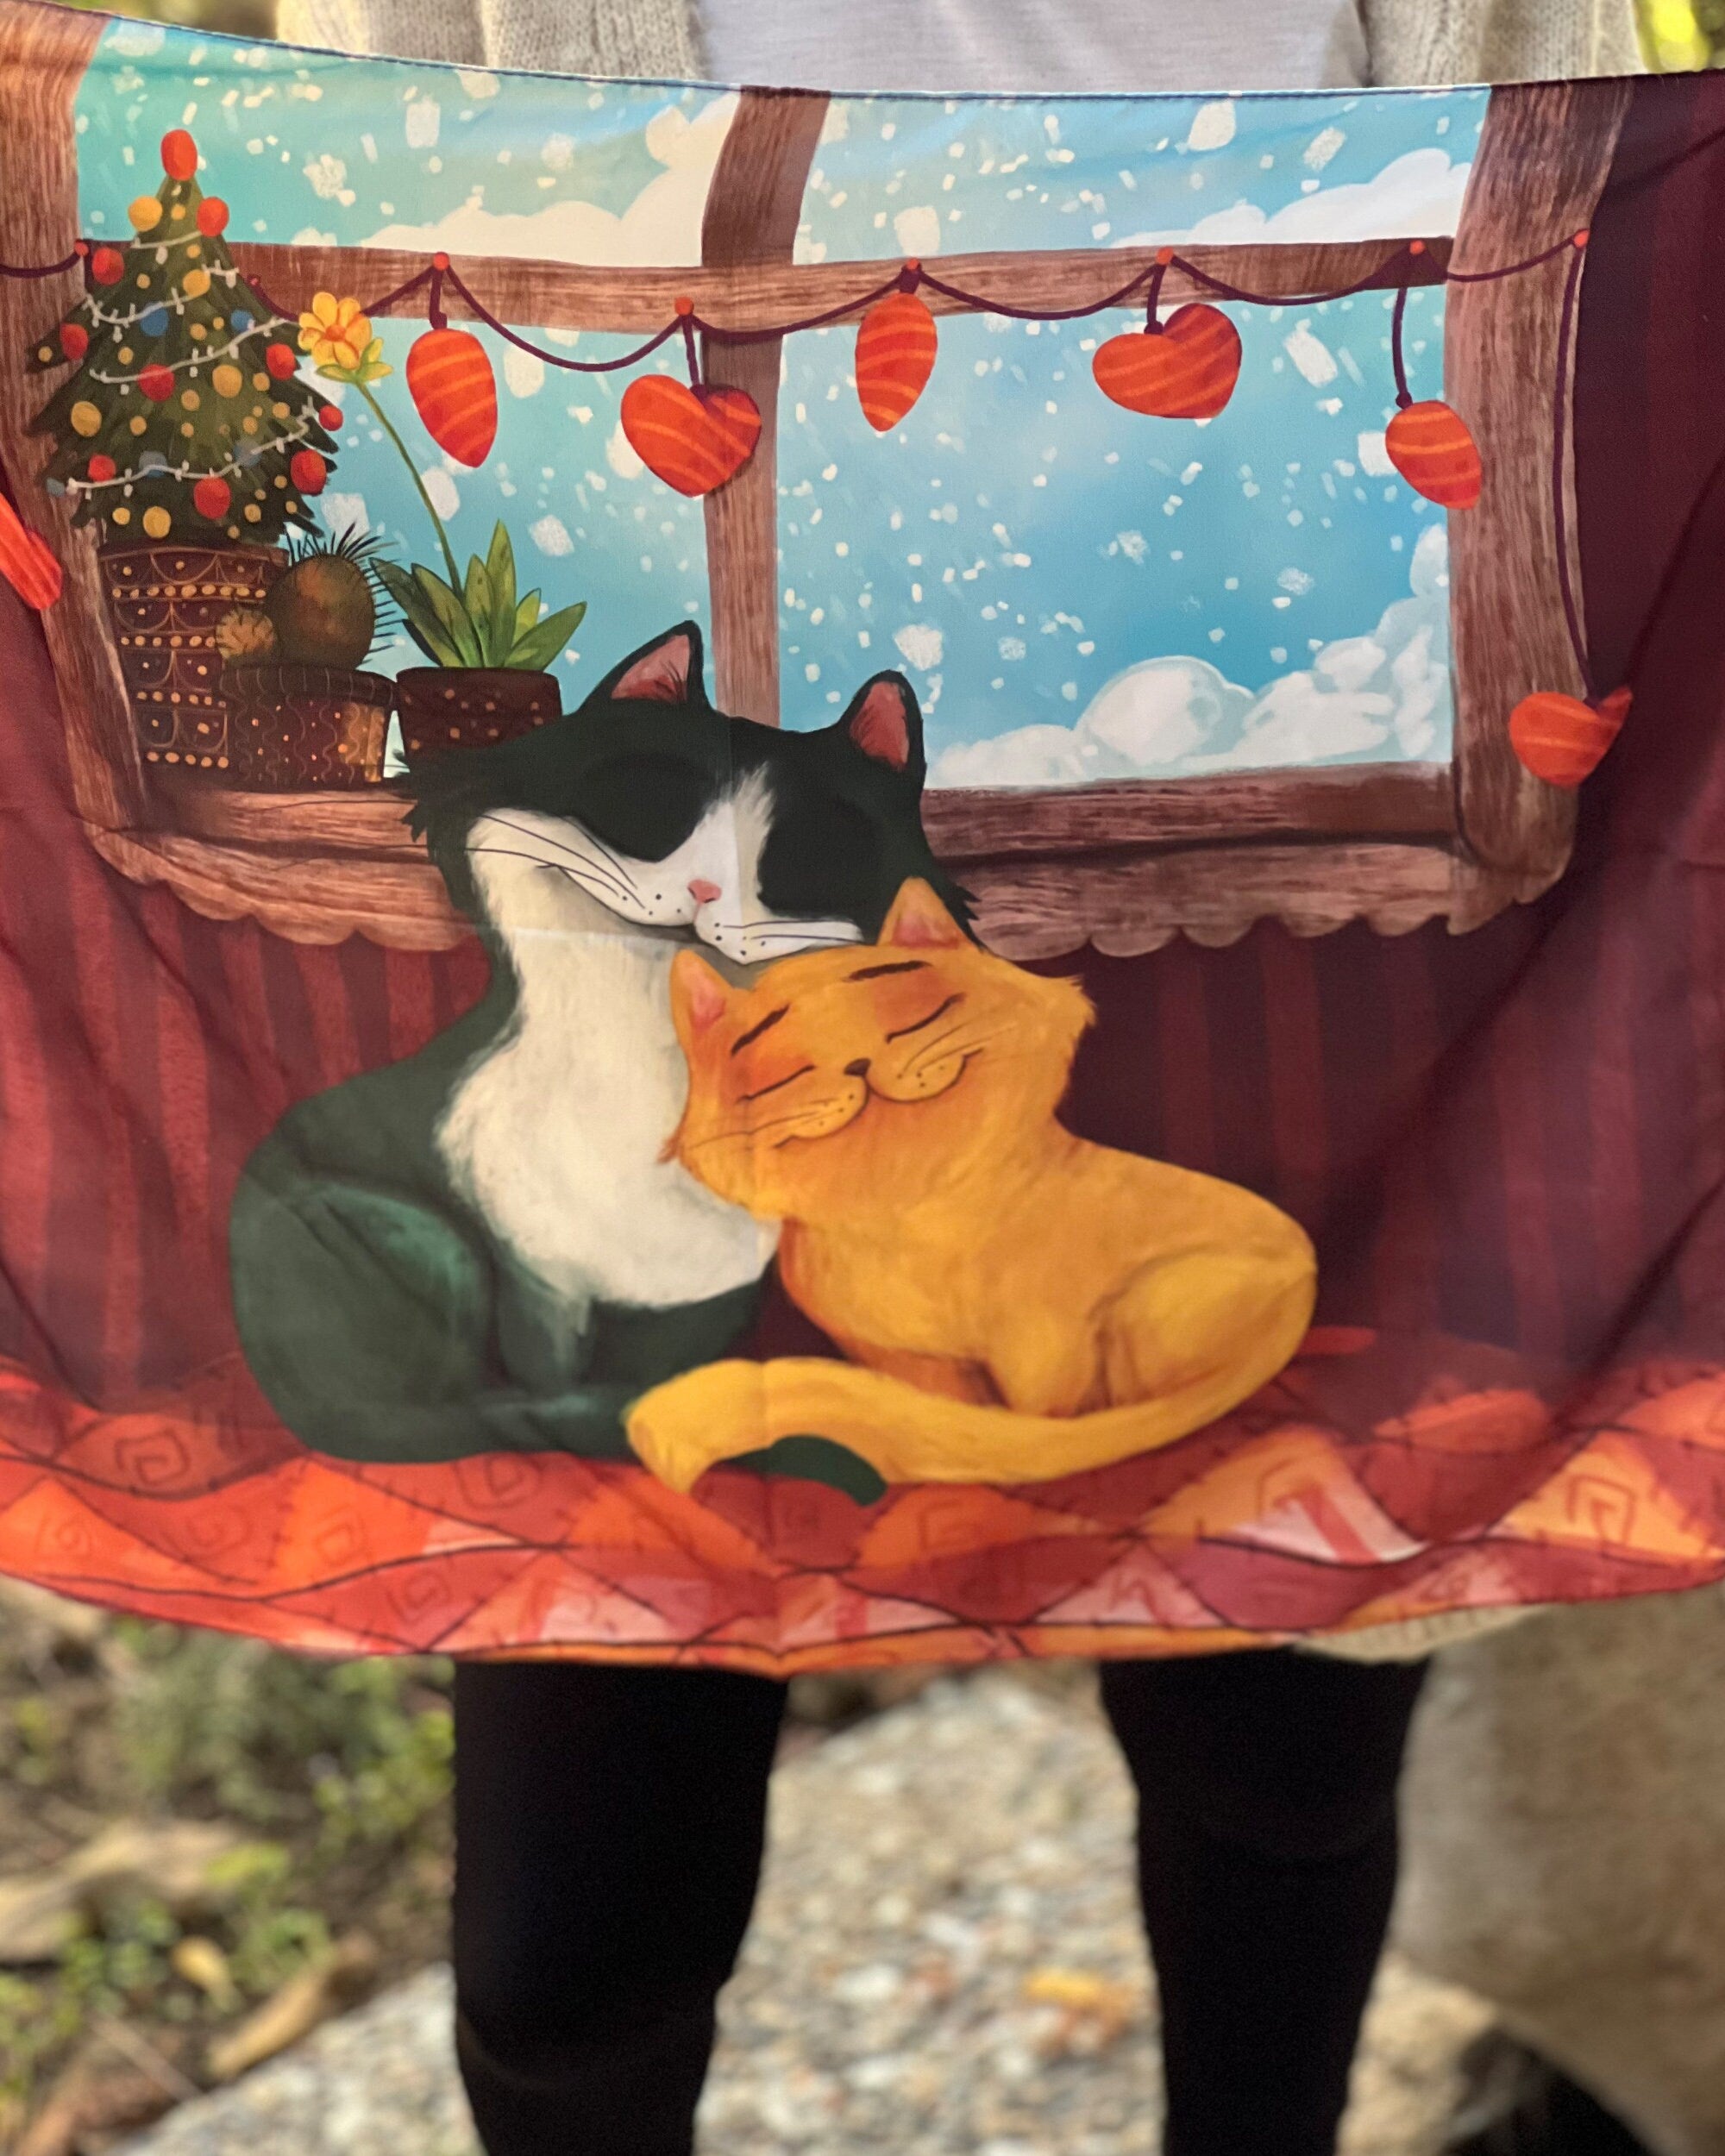 Treat yourself to a designer scarf this winter season. This satin head scarf is made from the finest quality materials and features a beautiful cat pattern design.